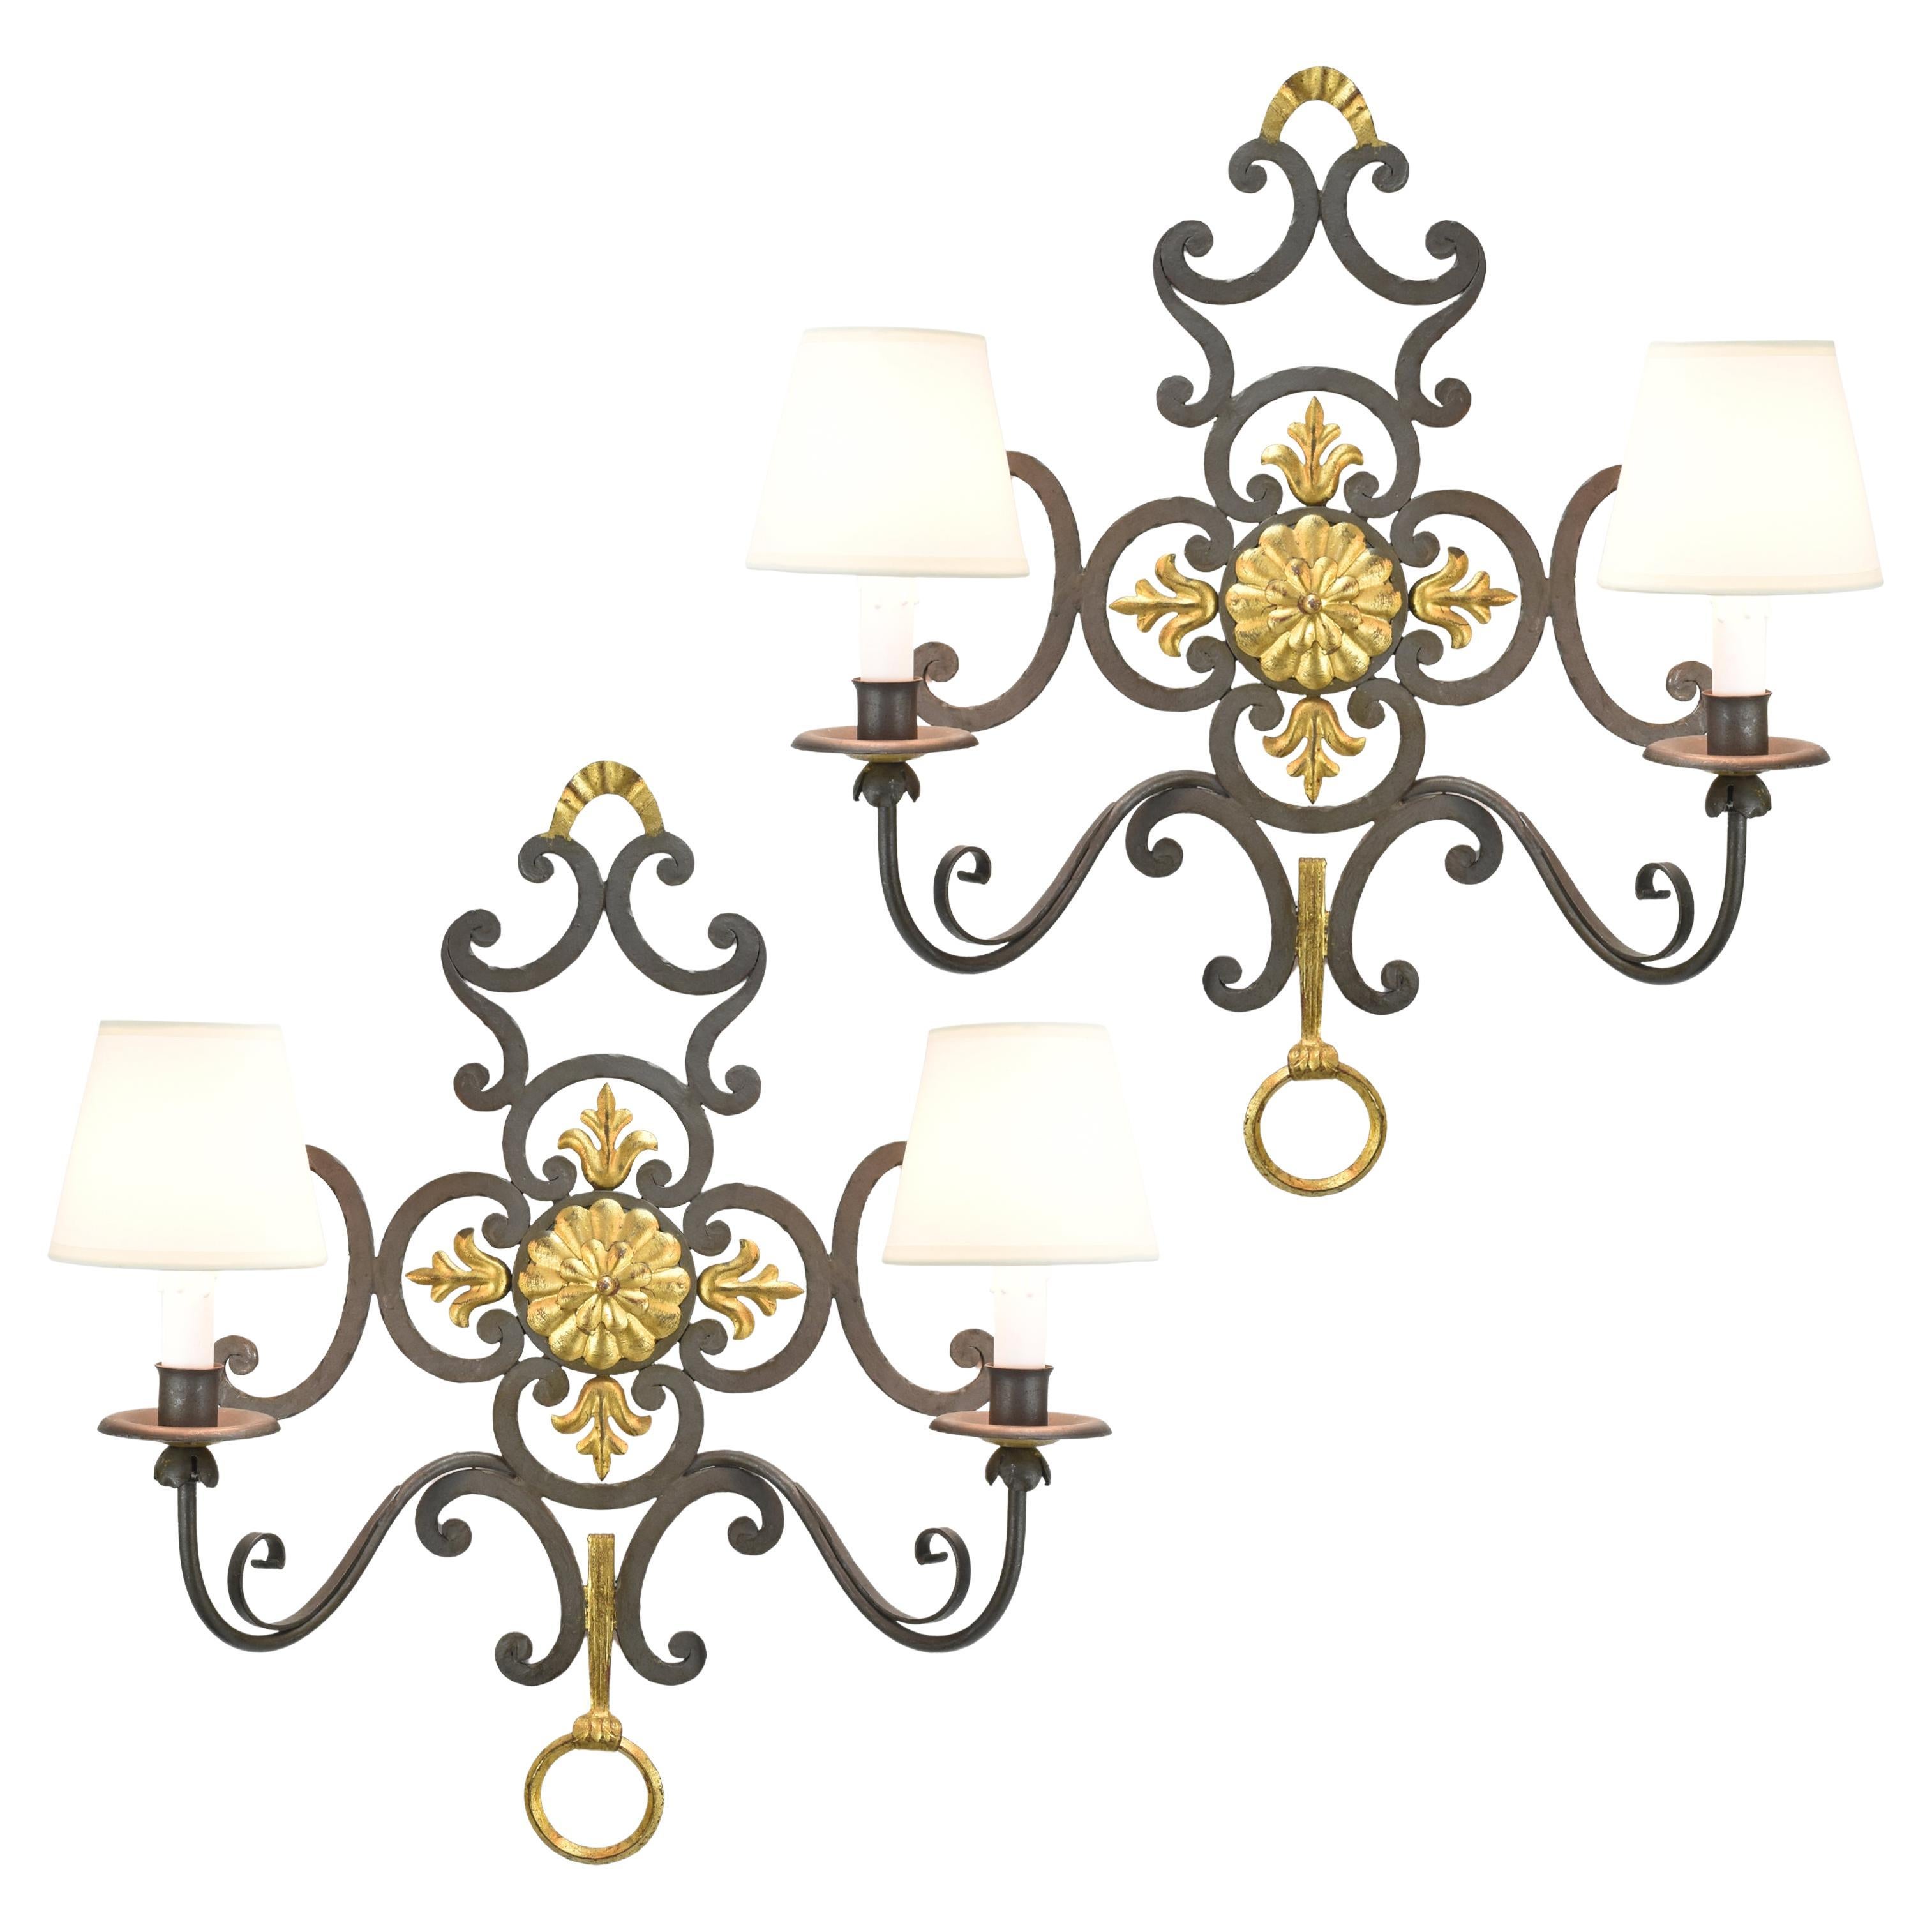 Vintage Pair of Large French Wrought Iron Wall Sconces Spanish Revival For Sale